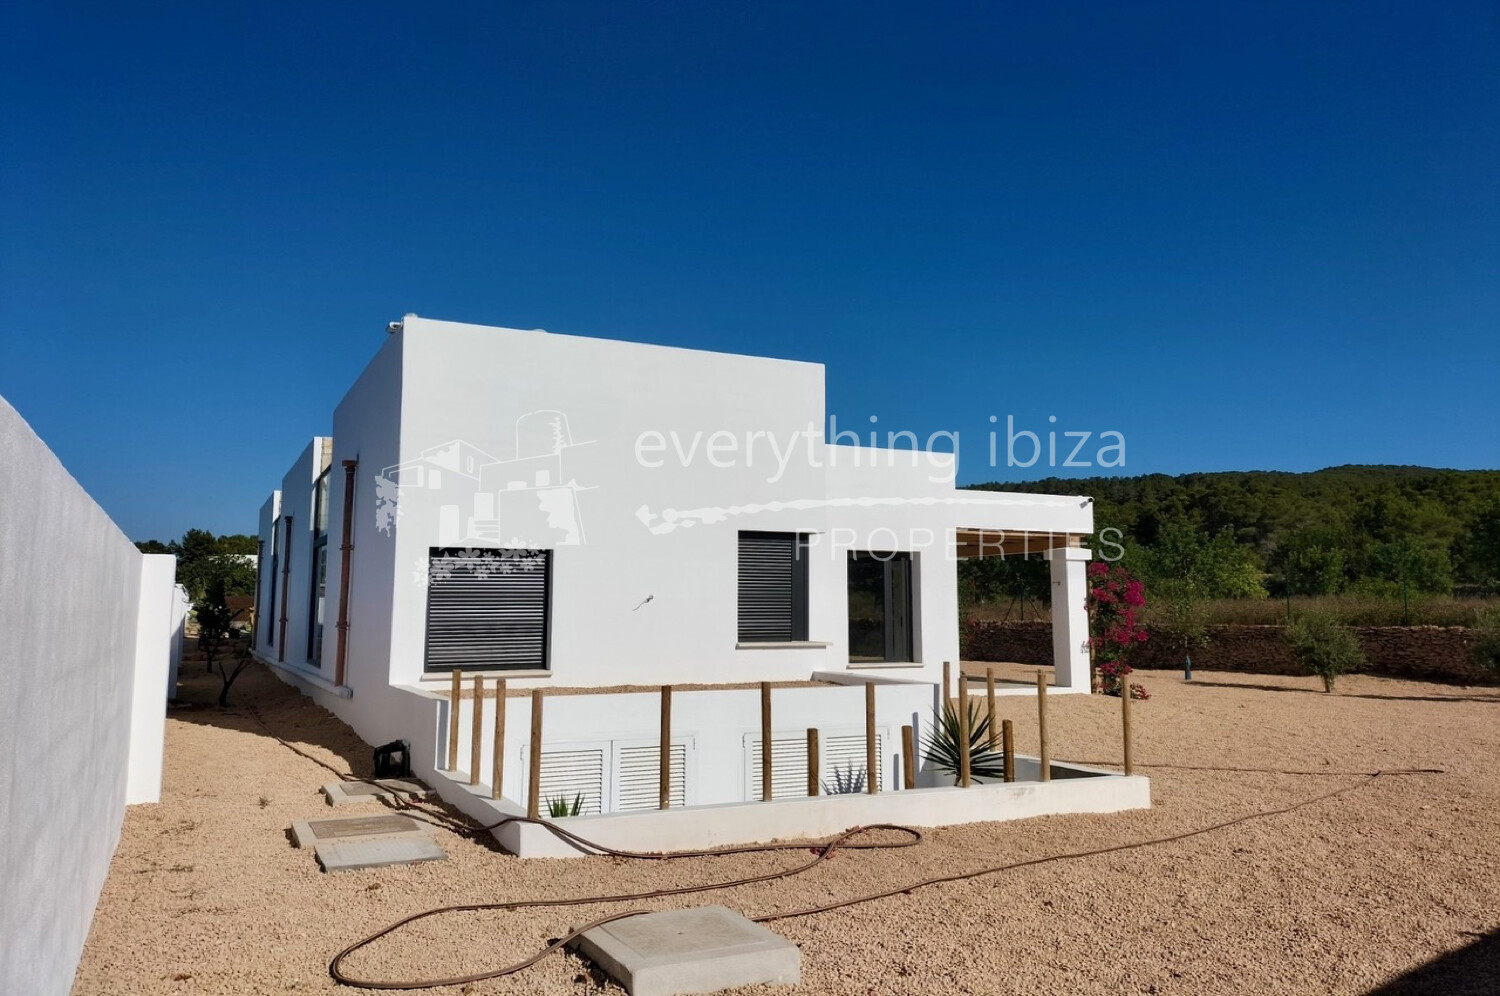 Super Modern New Build Villa Close to Sant Rafael Village, ref. 1625, for sale in Ibiza by everything ibiza Properties